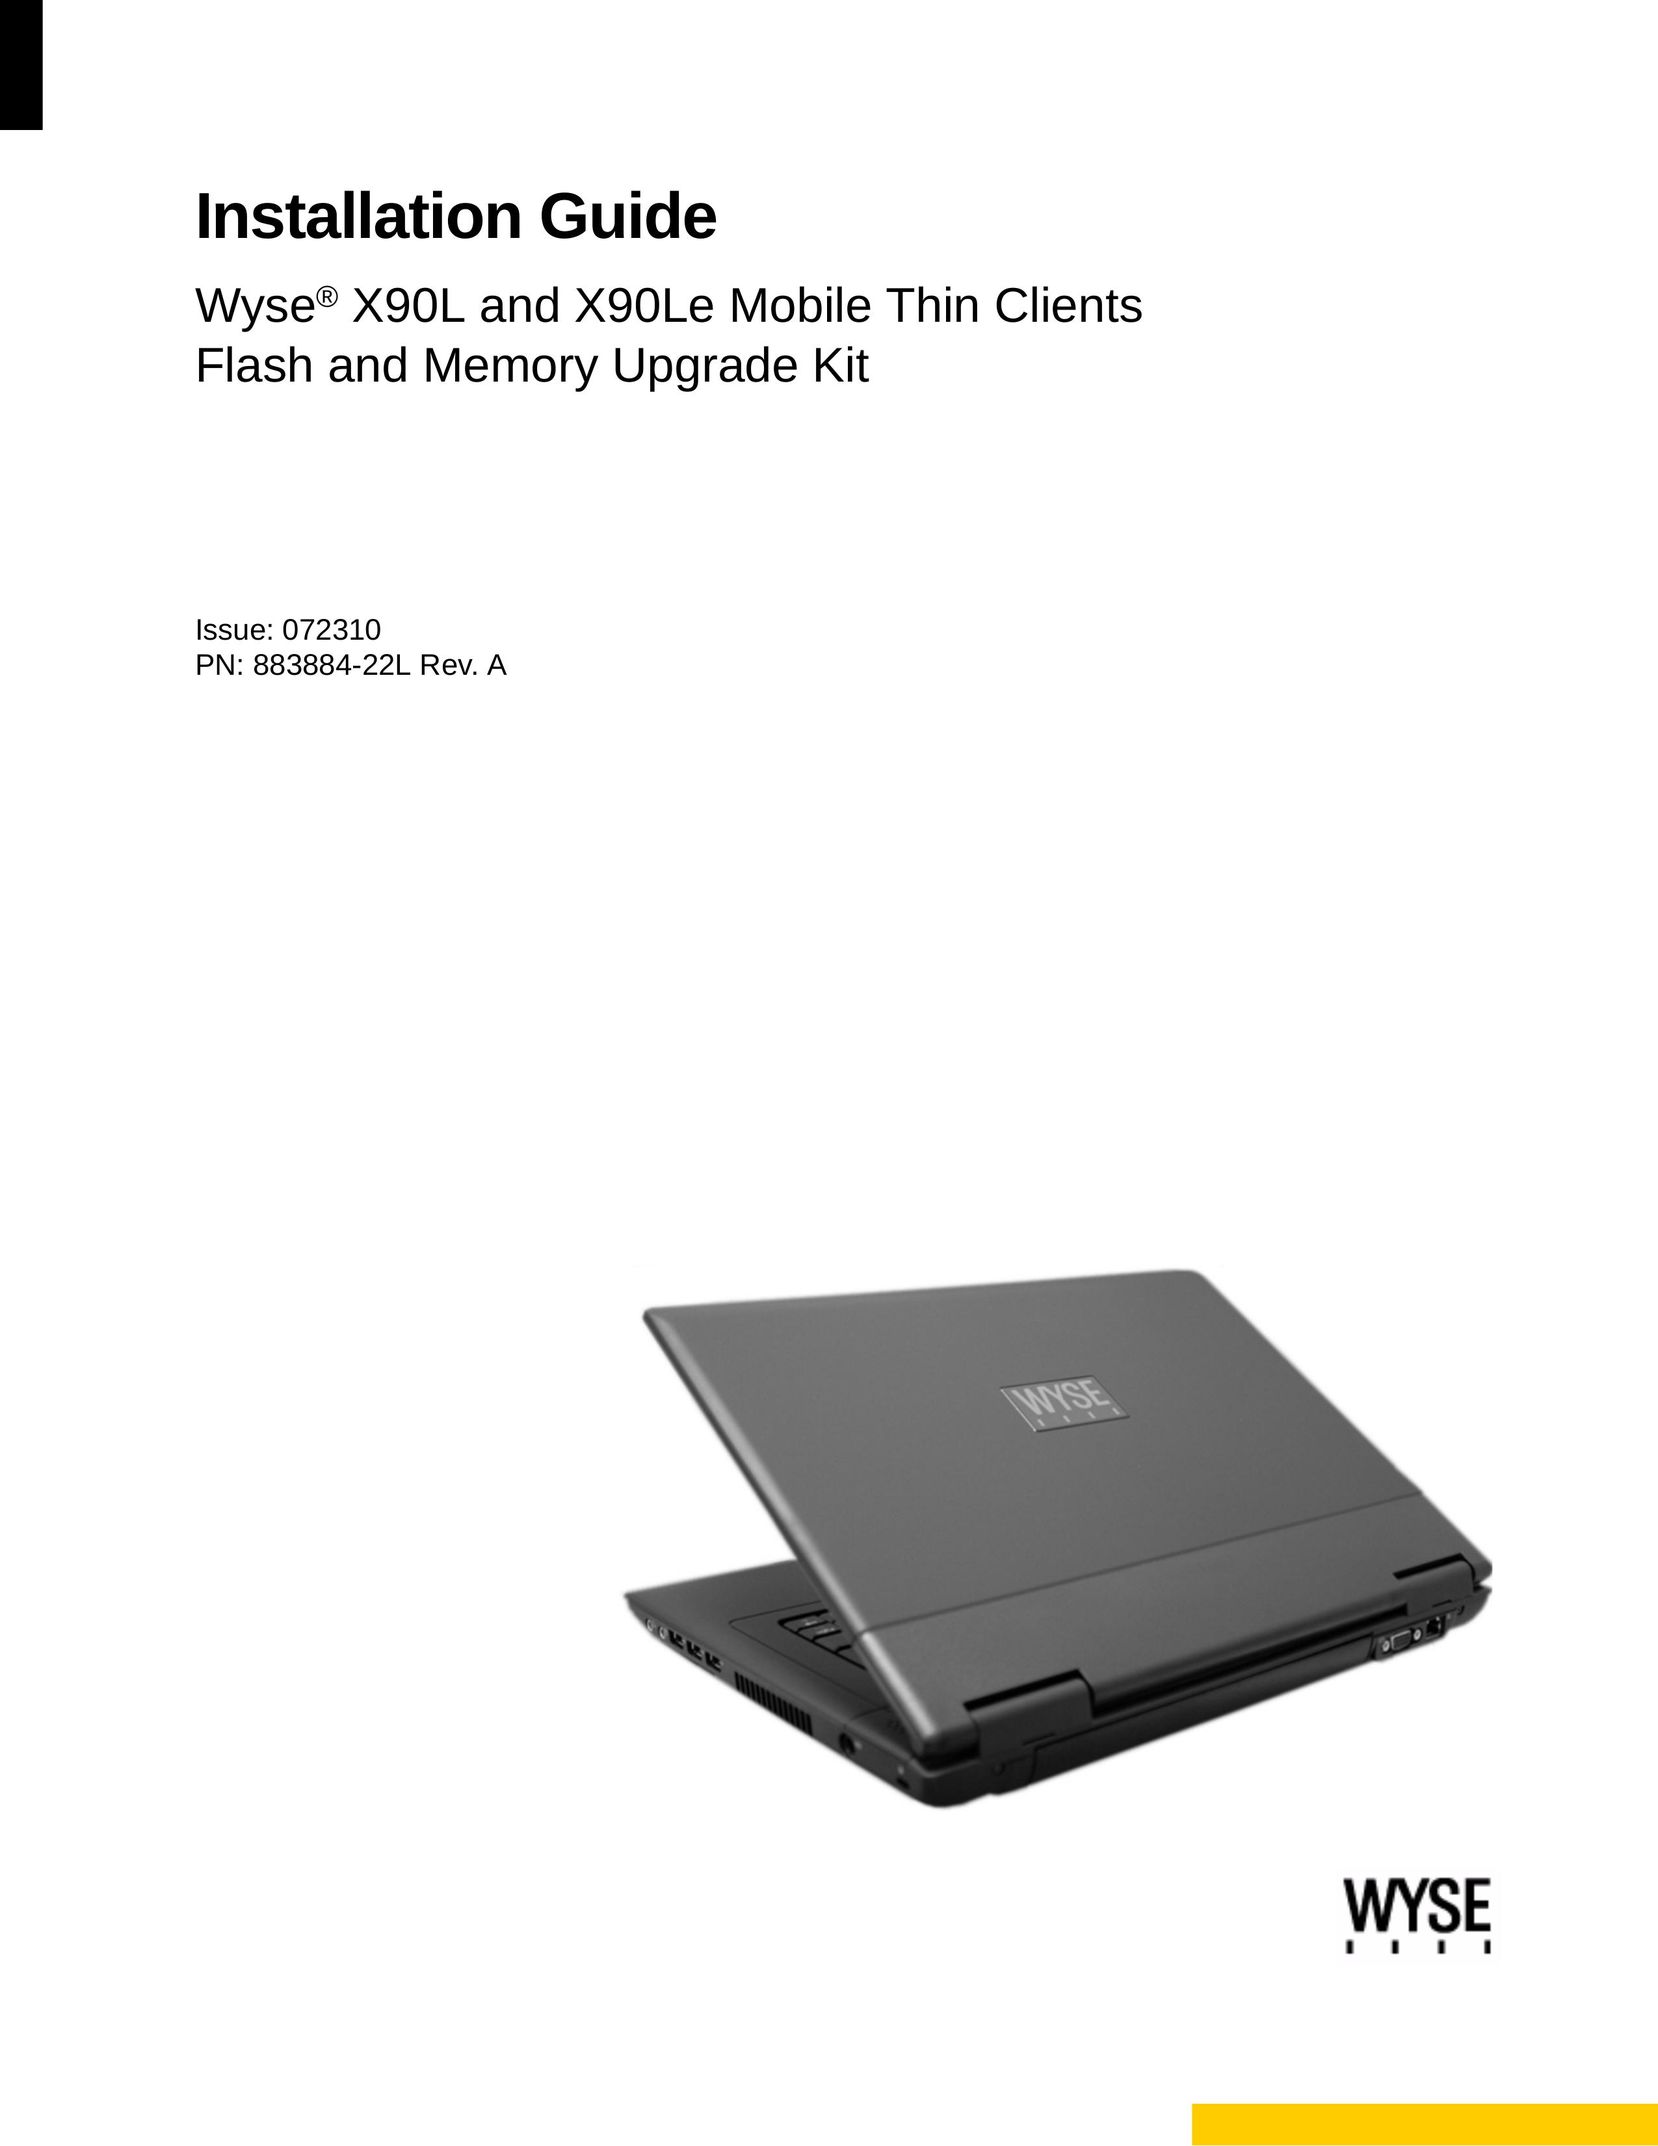 Wyse Technology X90L Computer Drive User Manual